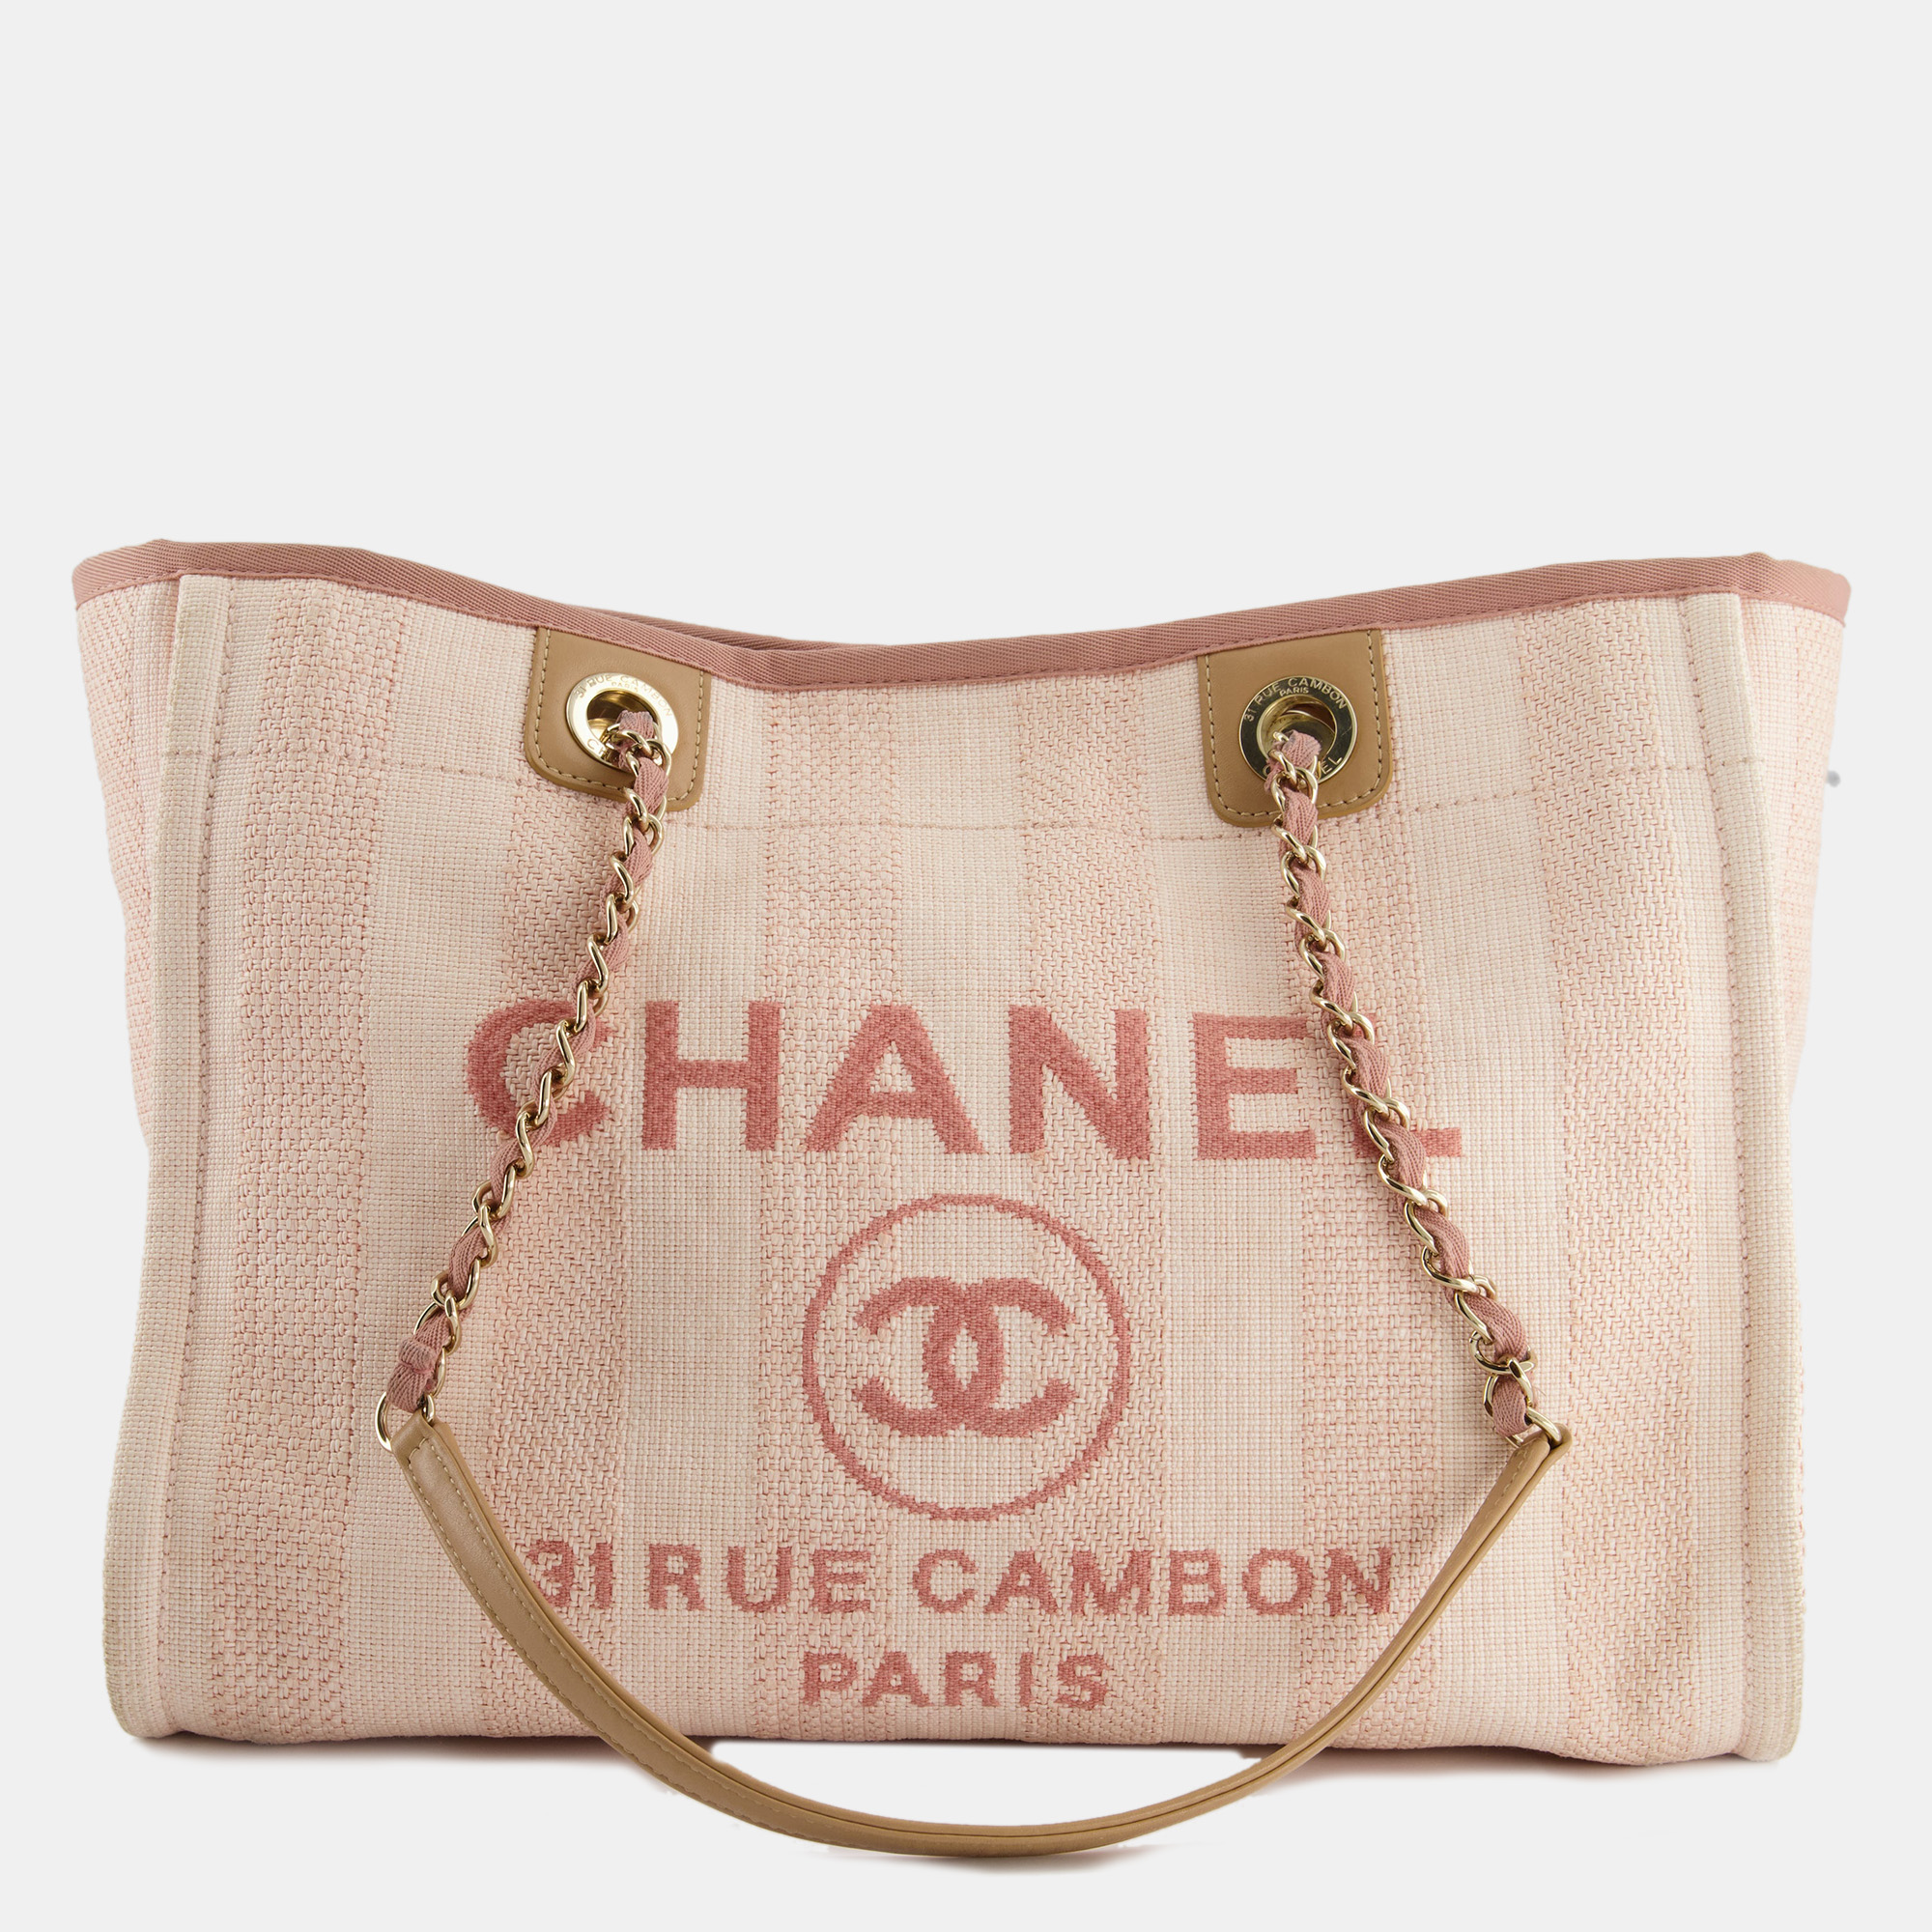 Chanel small pink stripe canvas deauville tote bag with logo print and champagne gold hardware